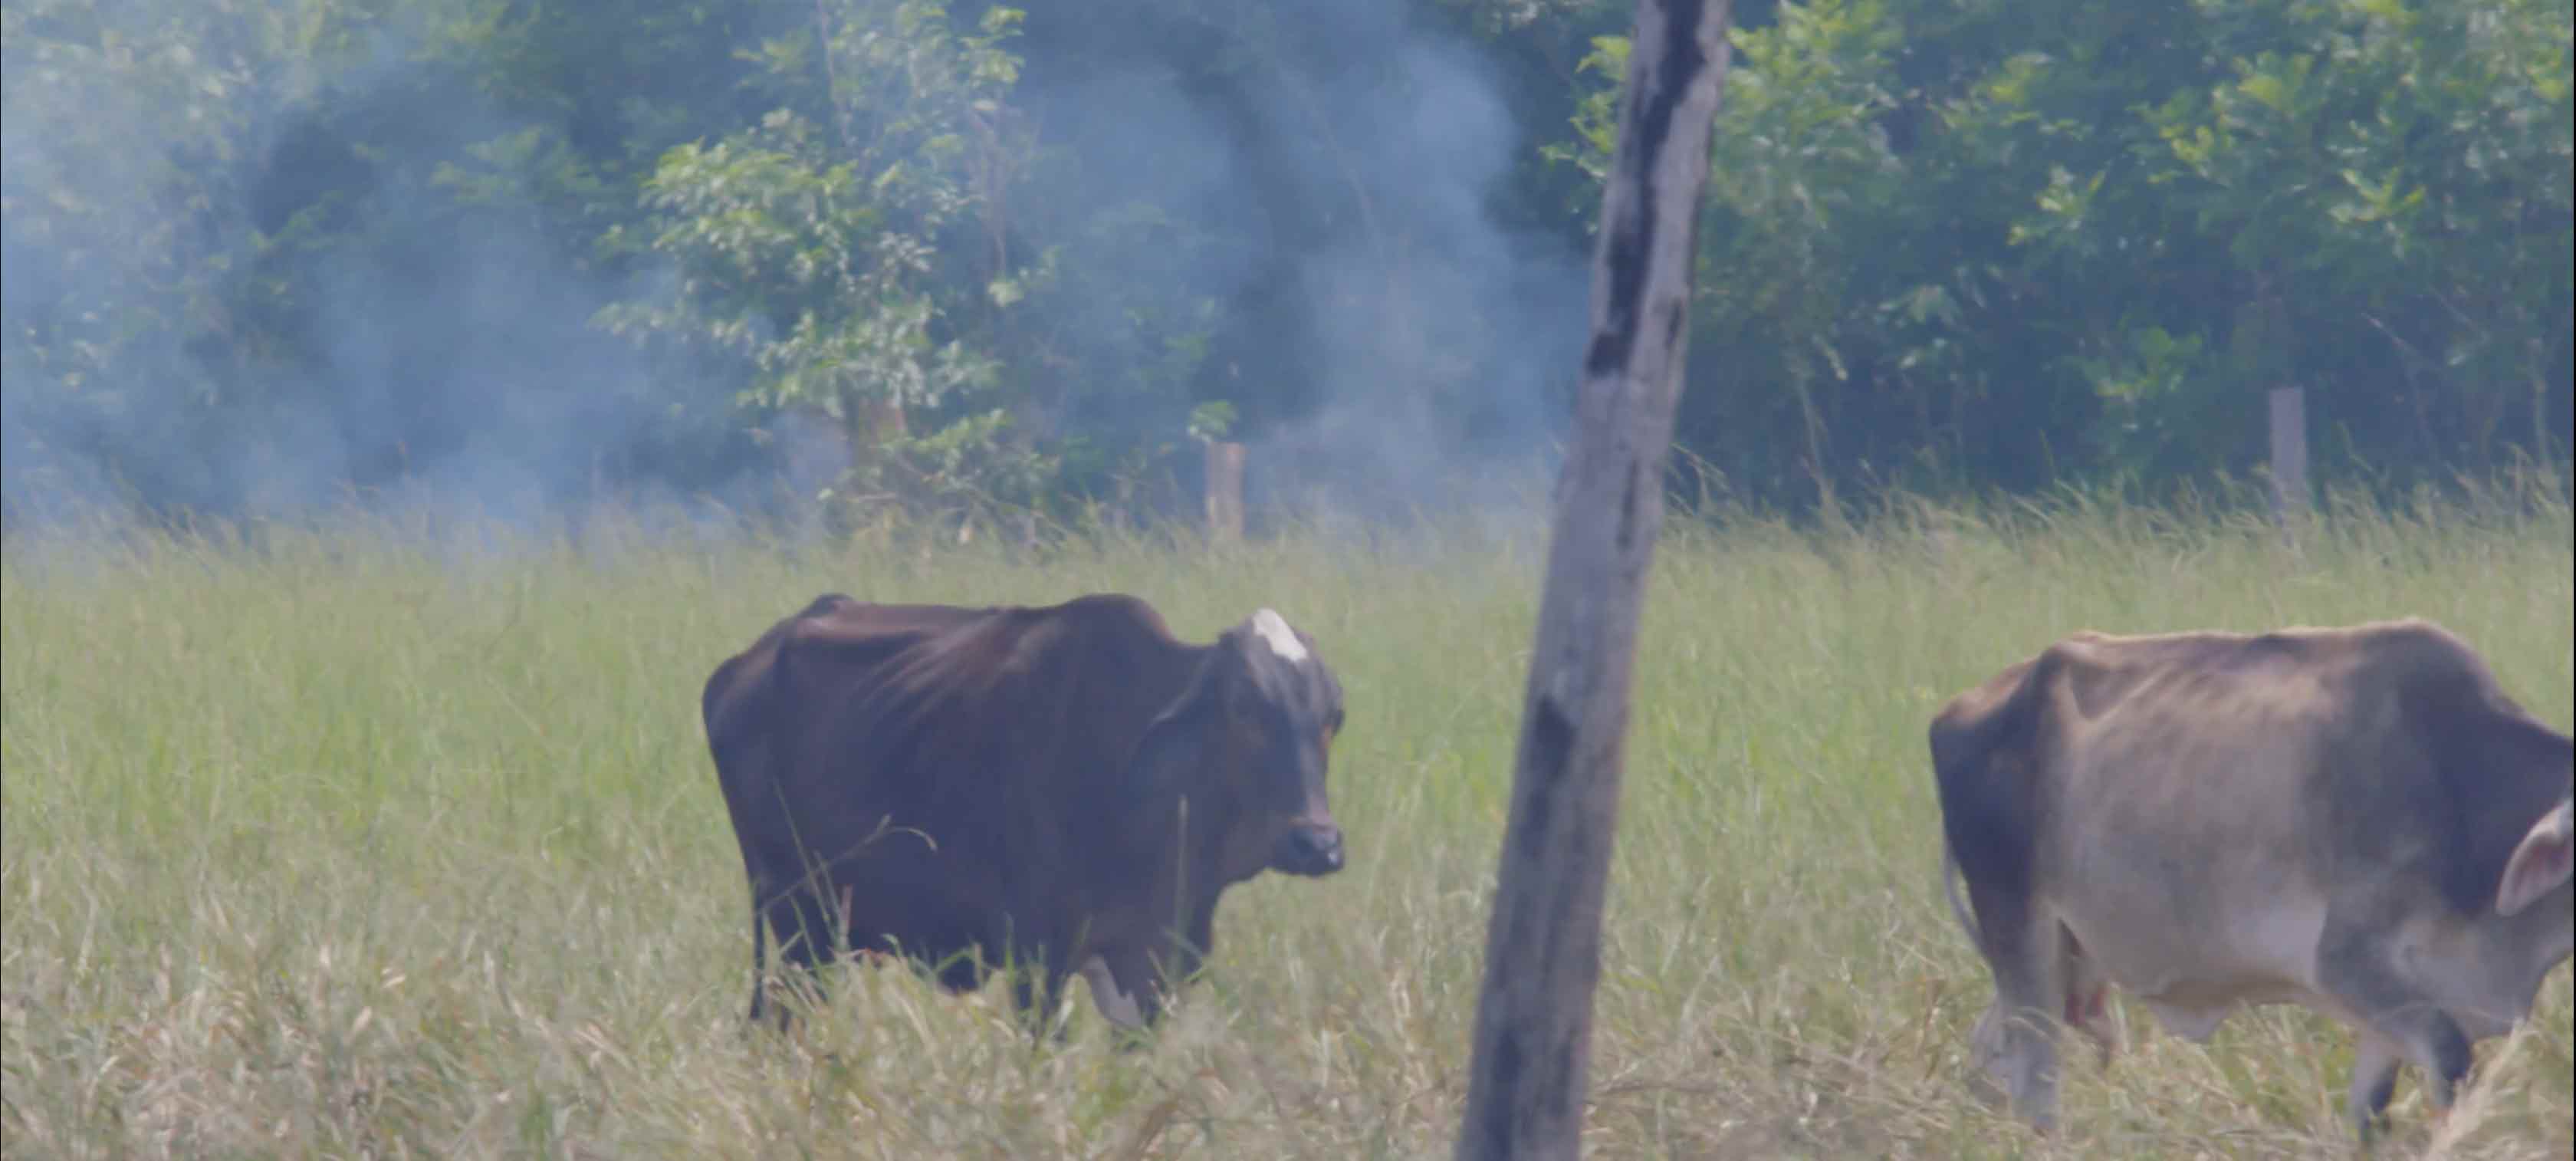 This image shows cows in the burning jungle